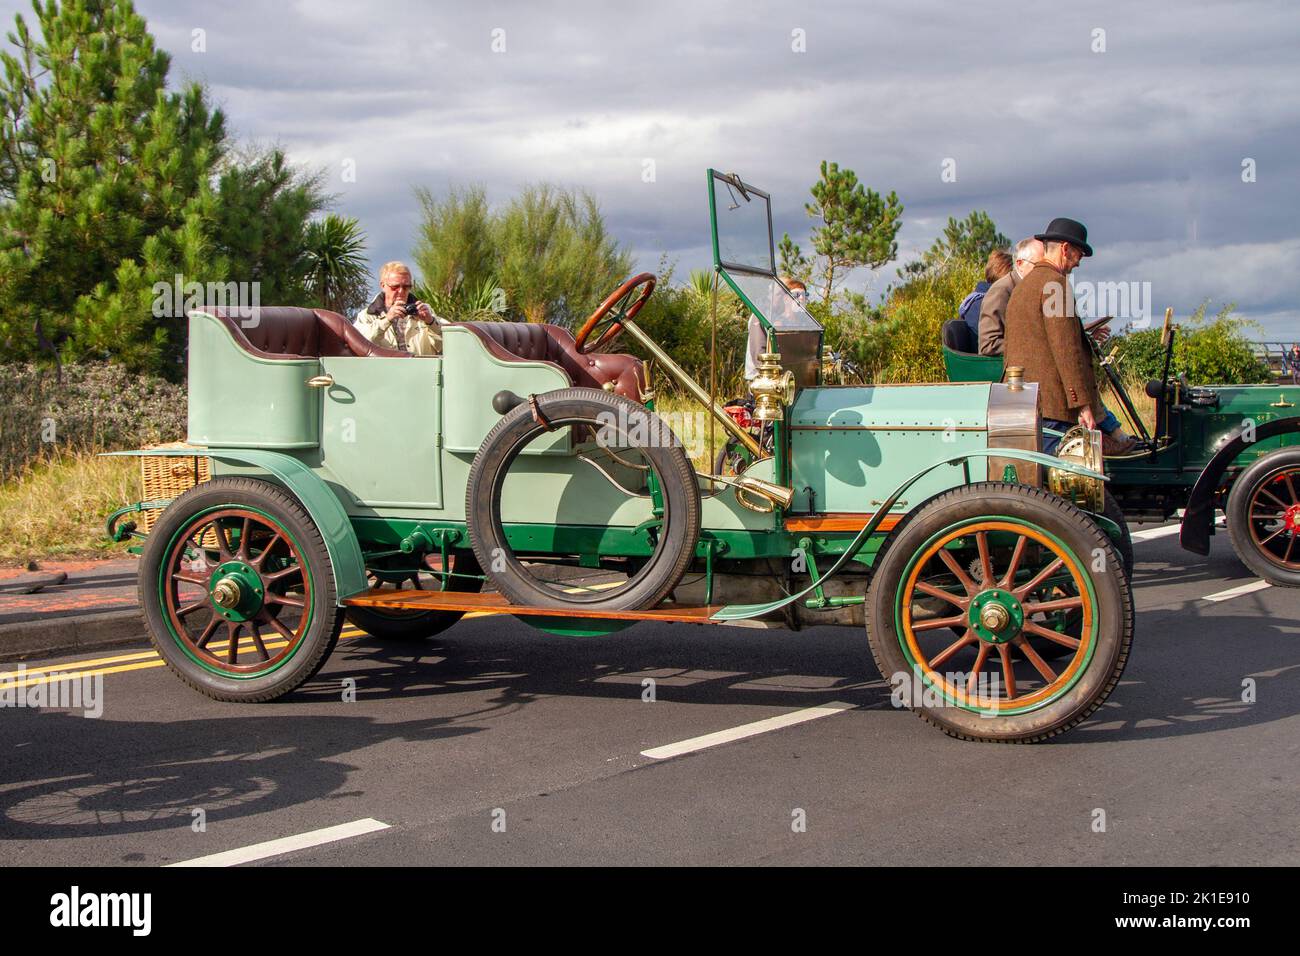 1910 Southport Built VULCAN jalopy; on display at the Southport Classic car and Speed event on the seafront promenade. UK Stock Photo